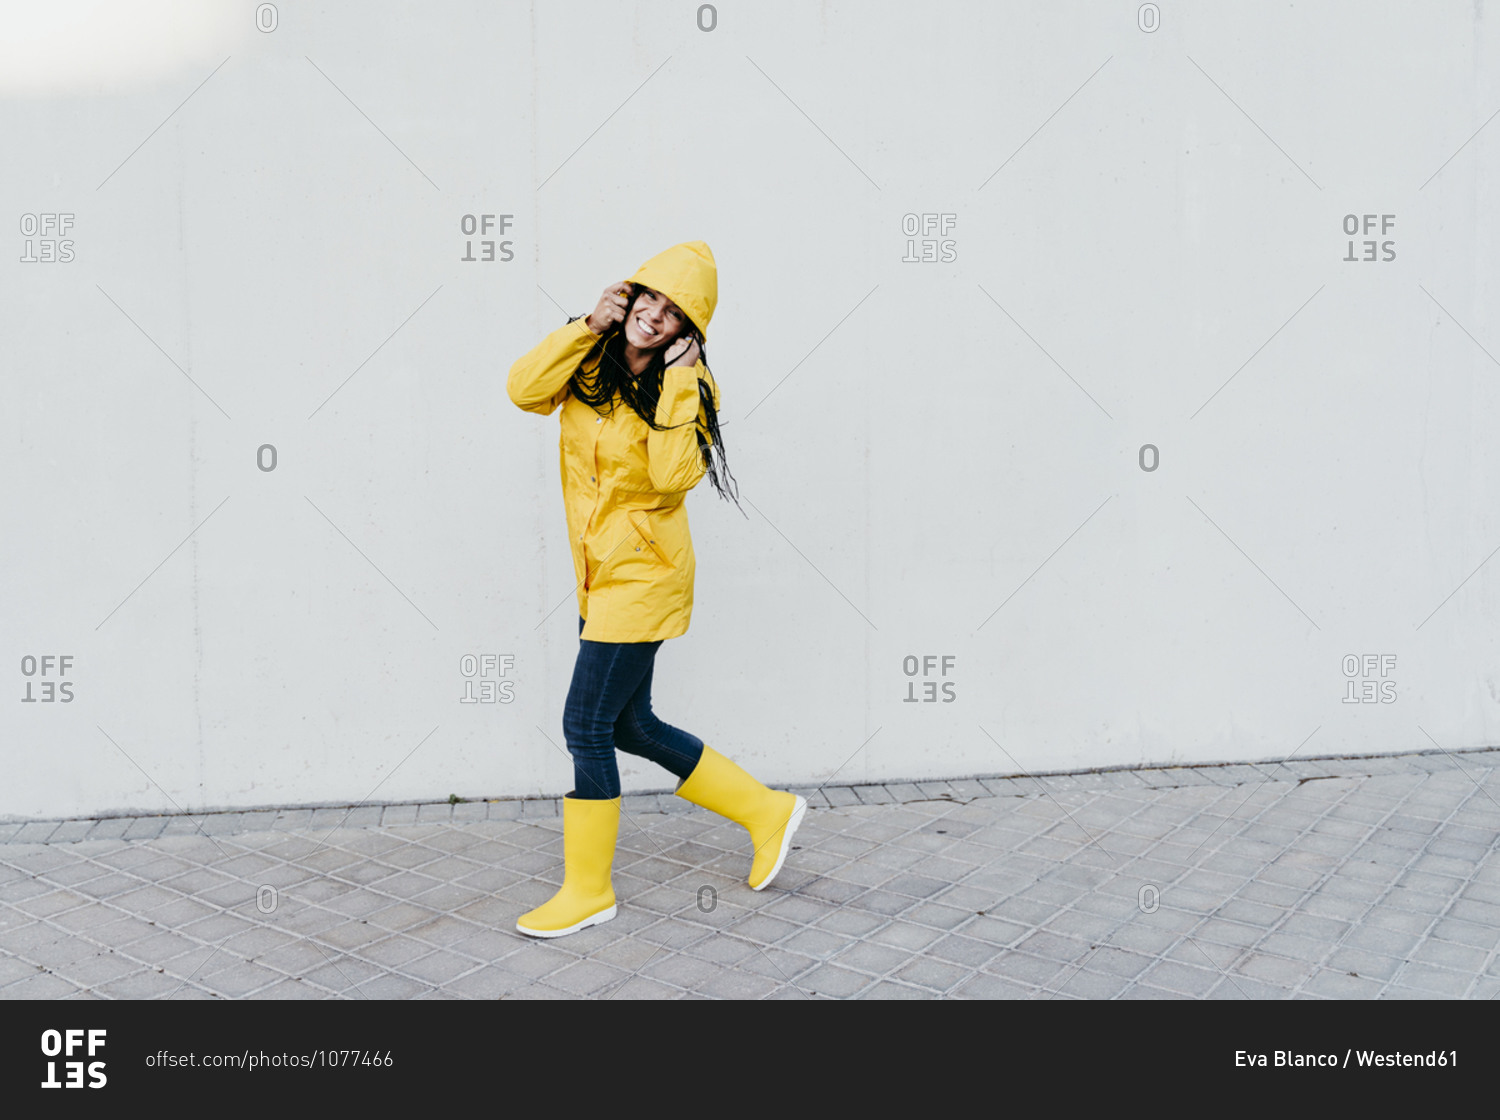 Smiling woman wearing raincoat standing on footpath against gray wall